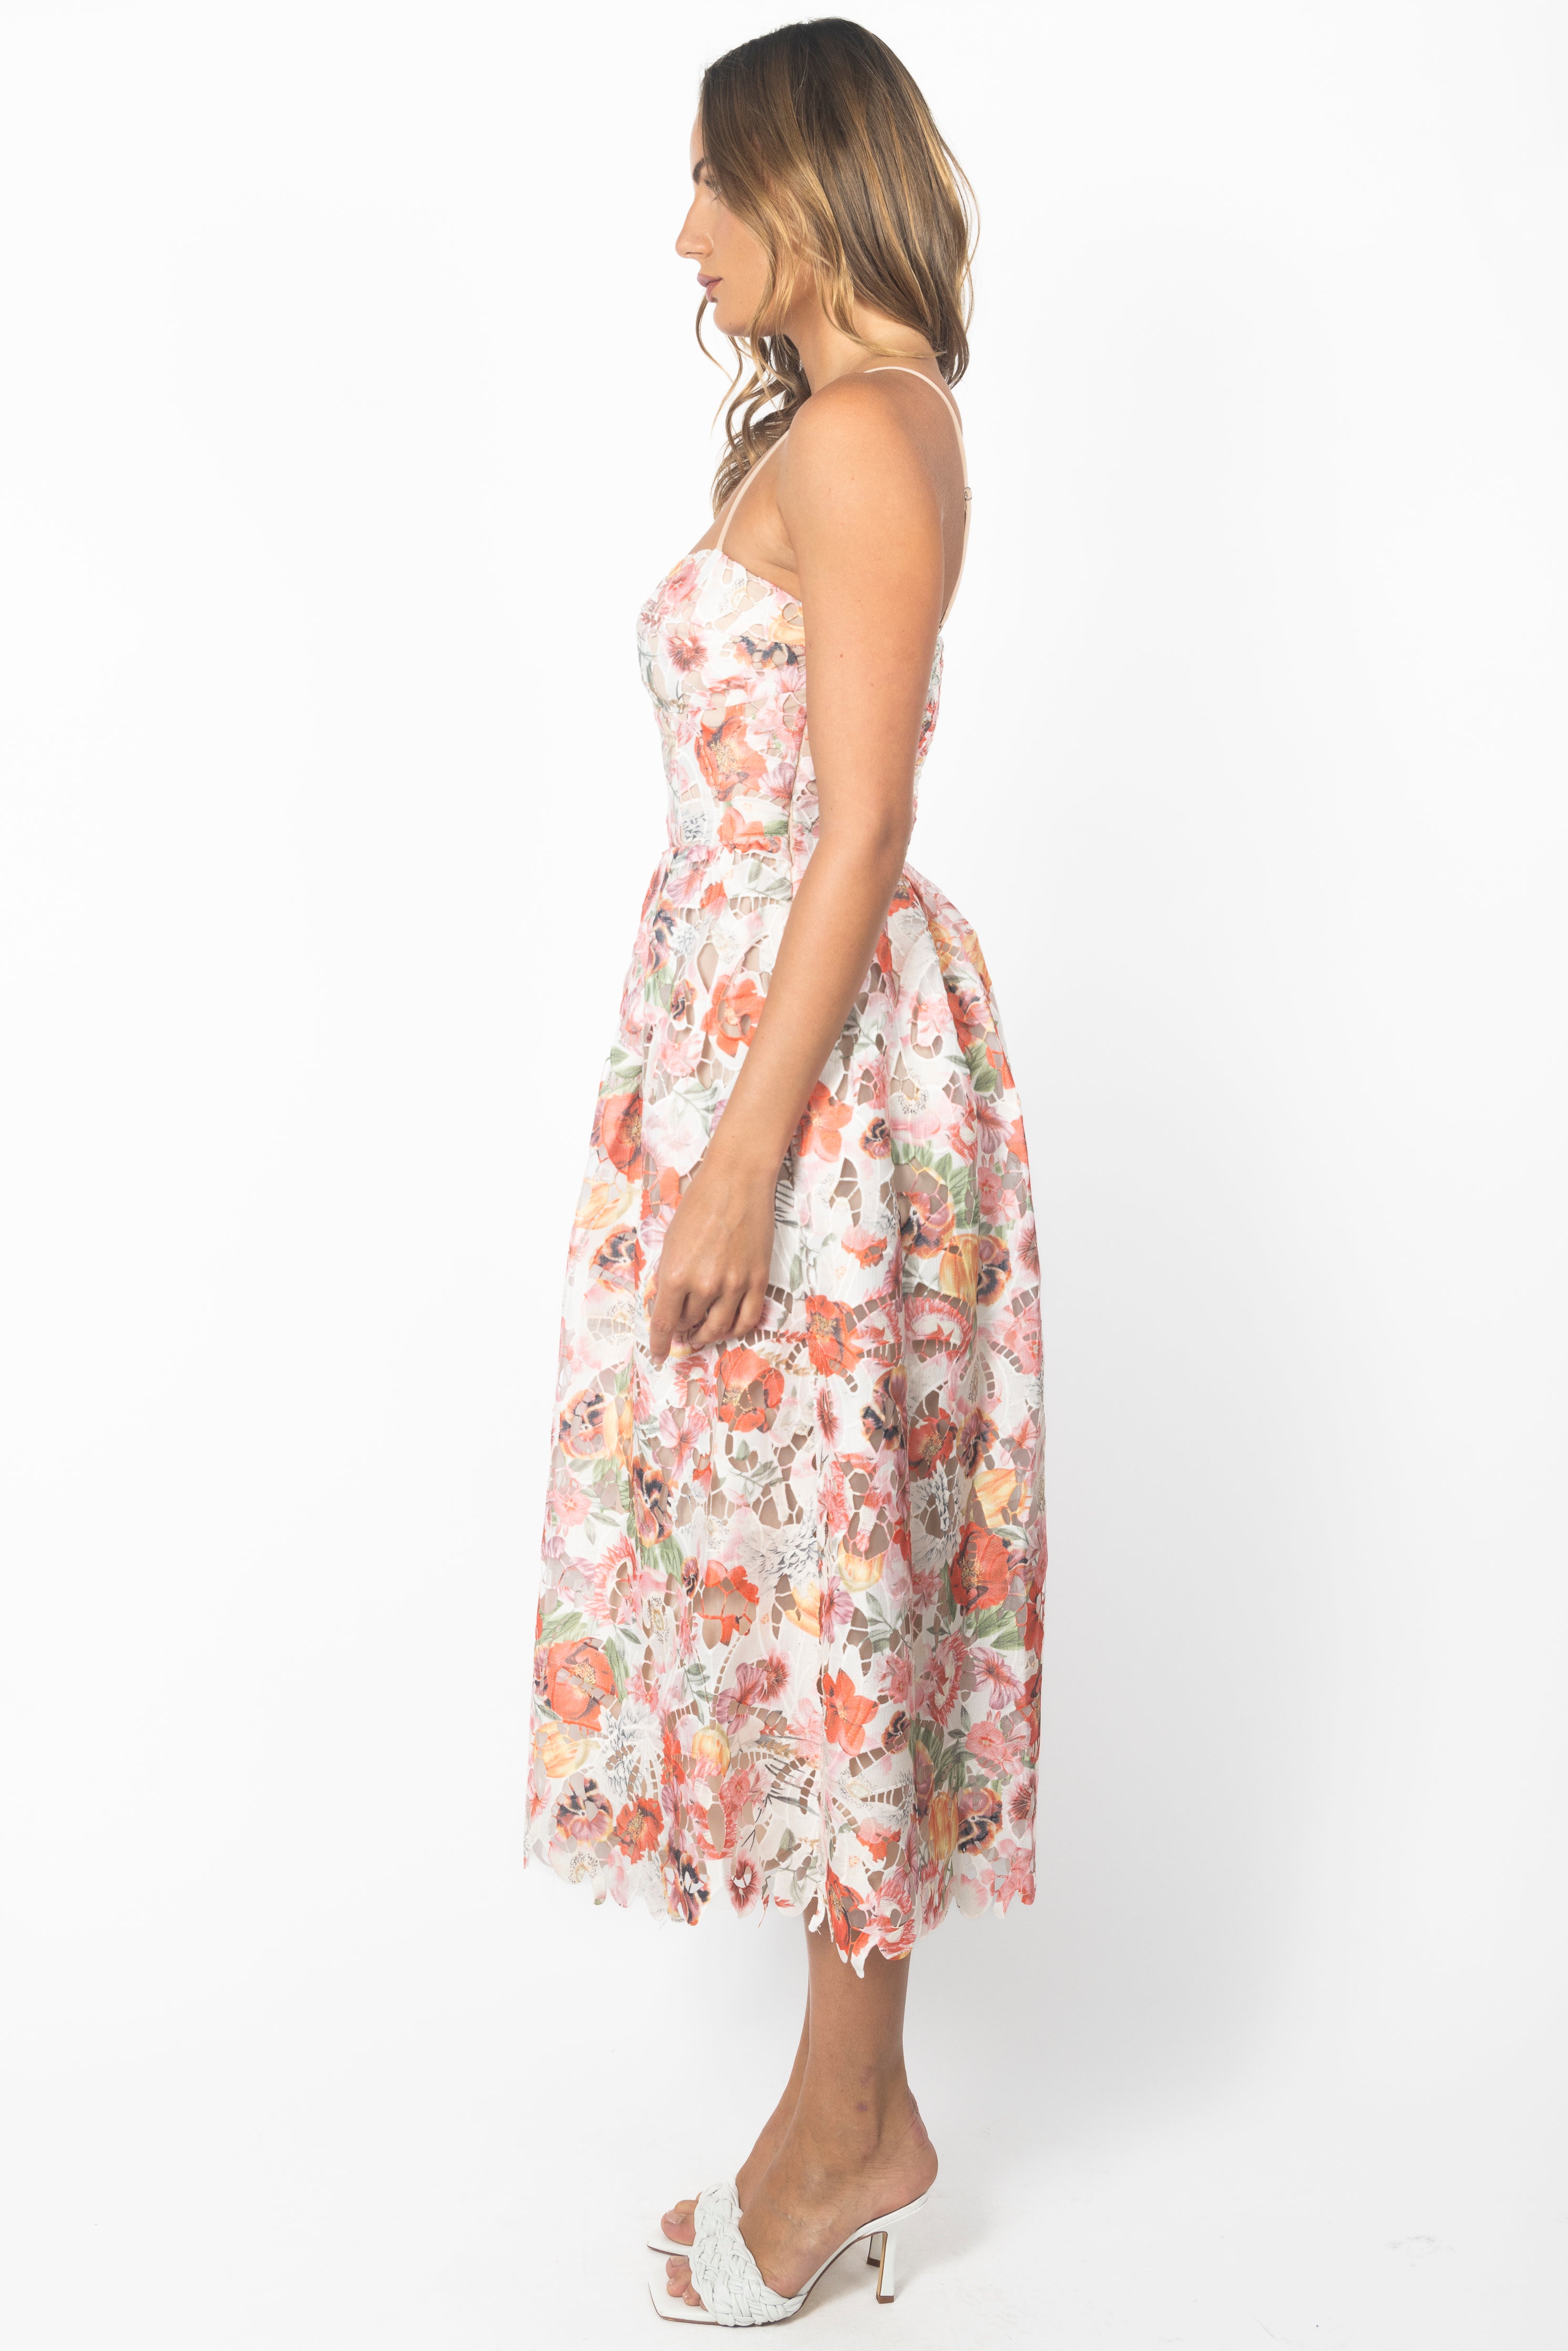 LACEY FLORAL DRESS